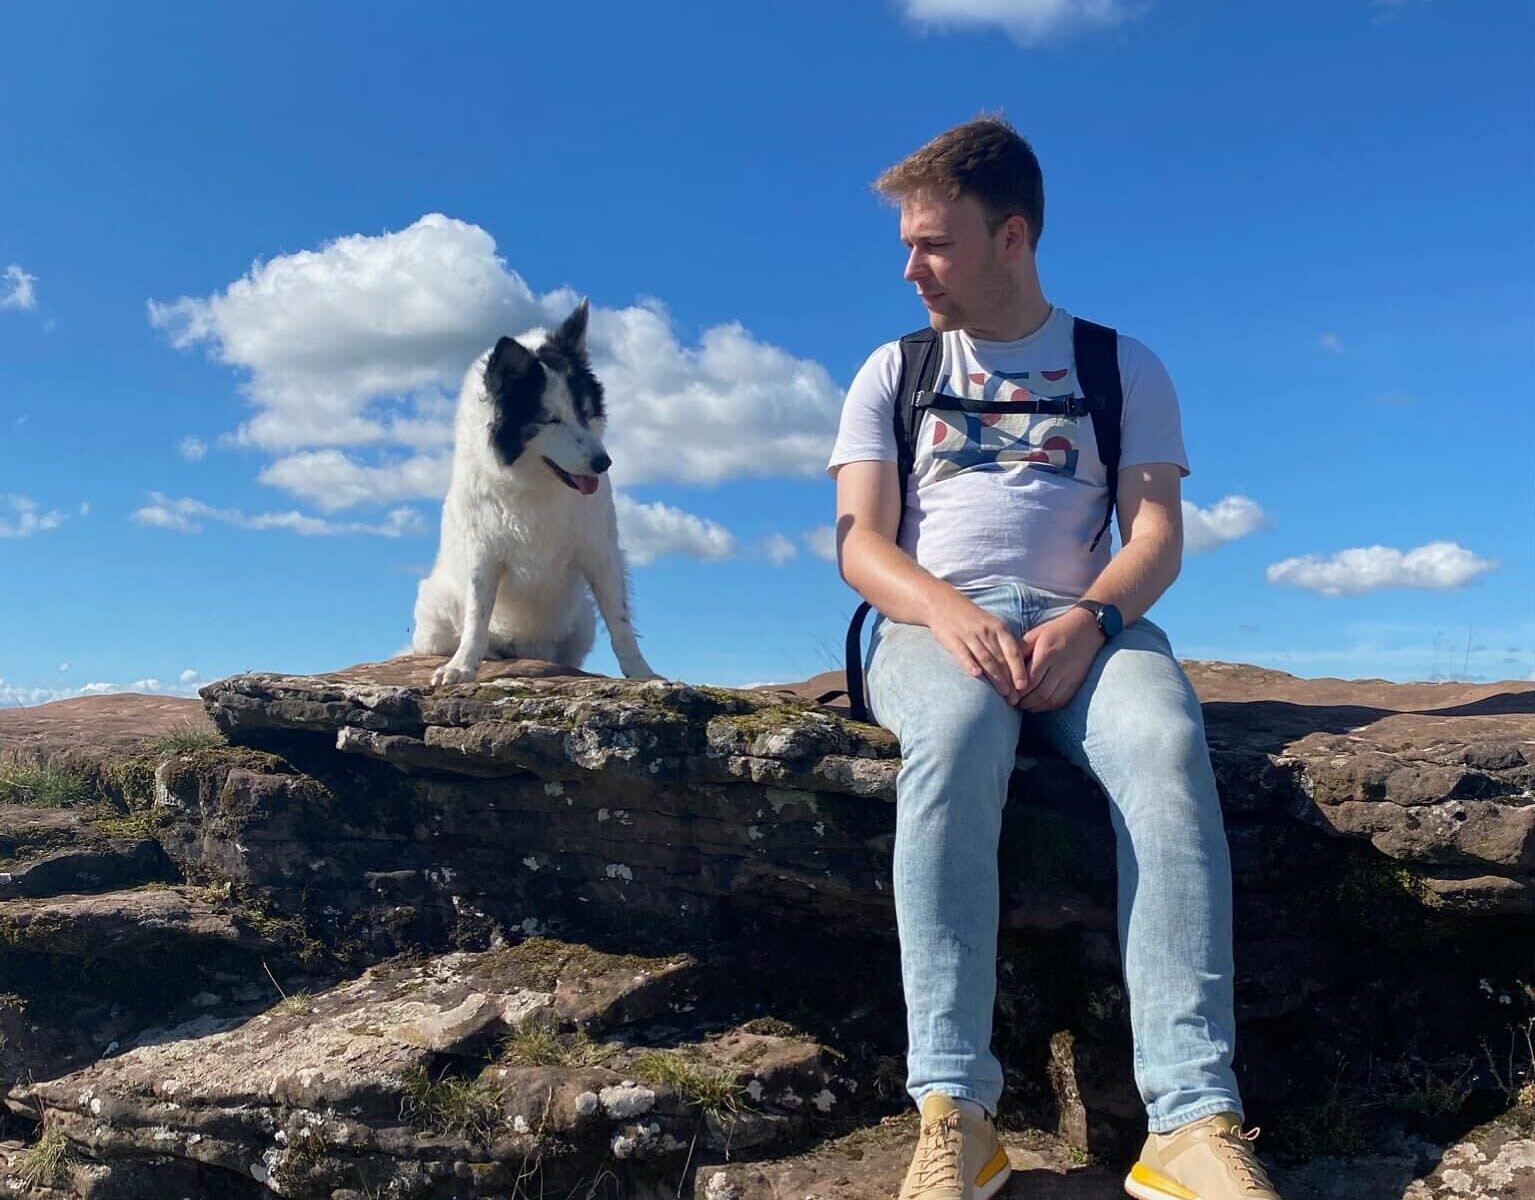 George sitting on a rocky outcrop looking over to his gorgeous white collie who is admiring the views.